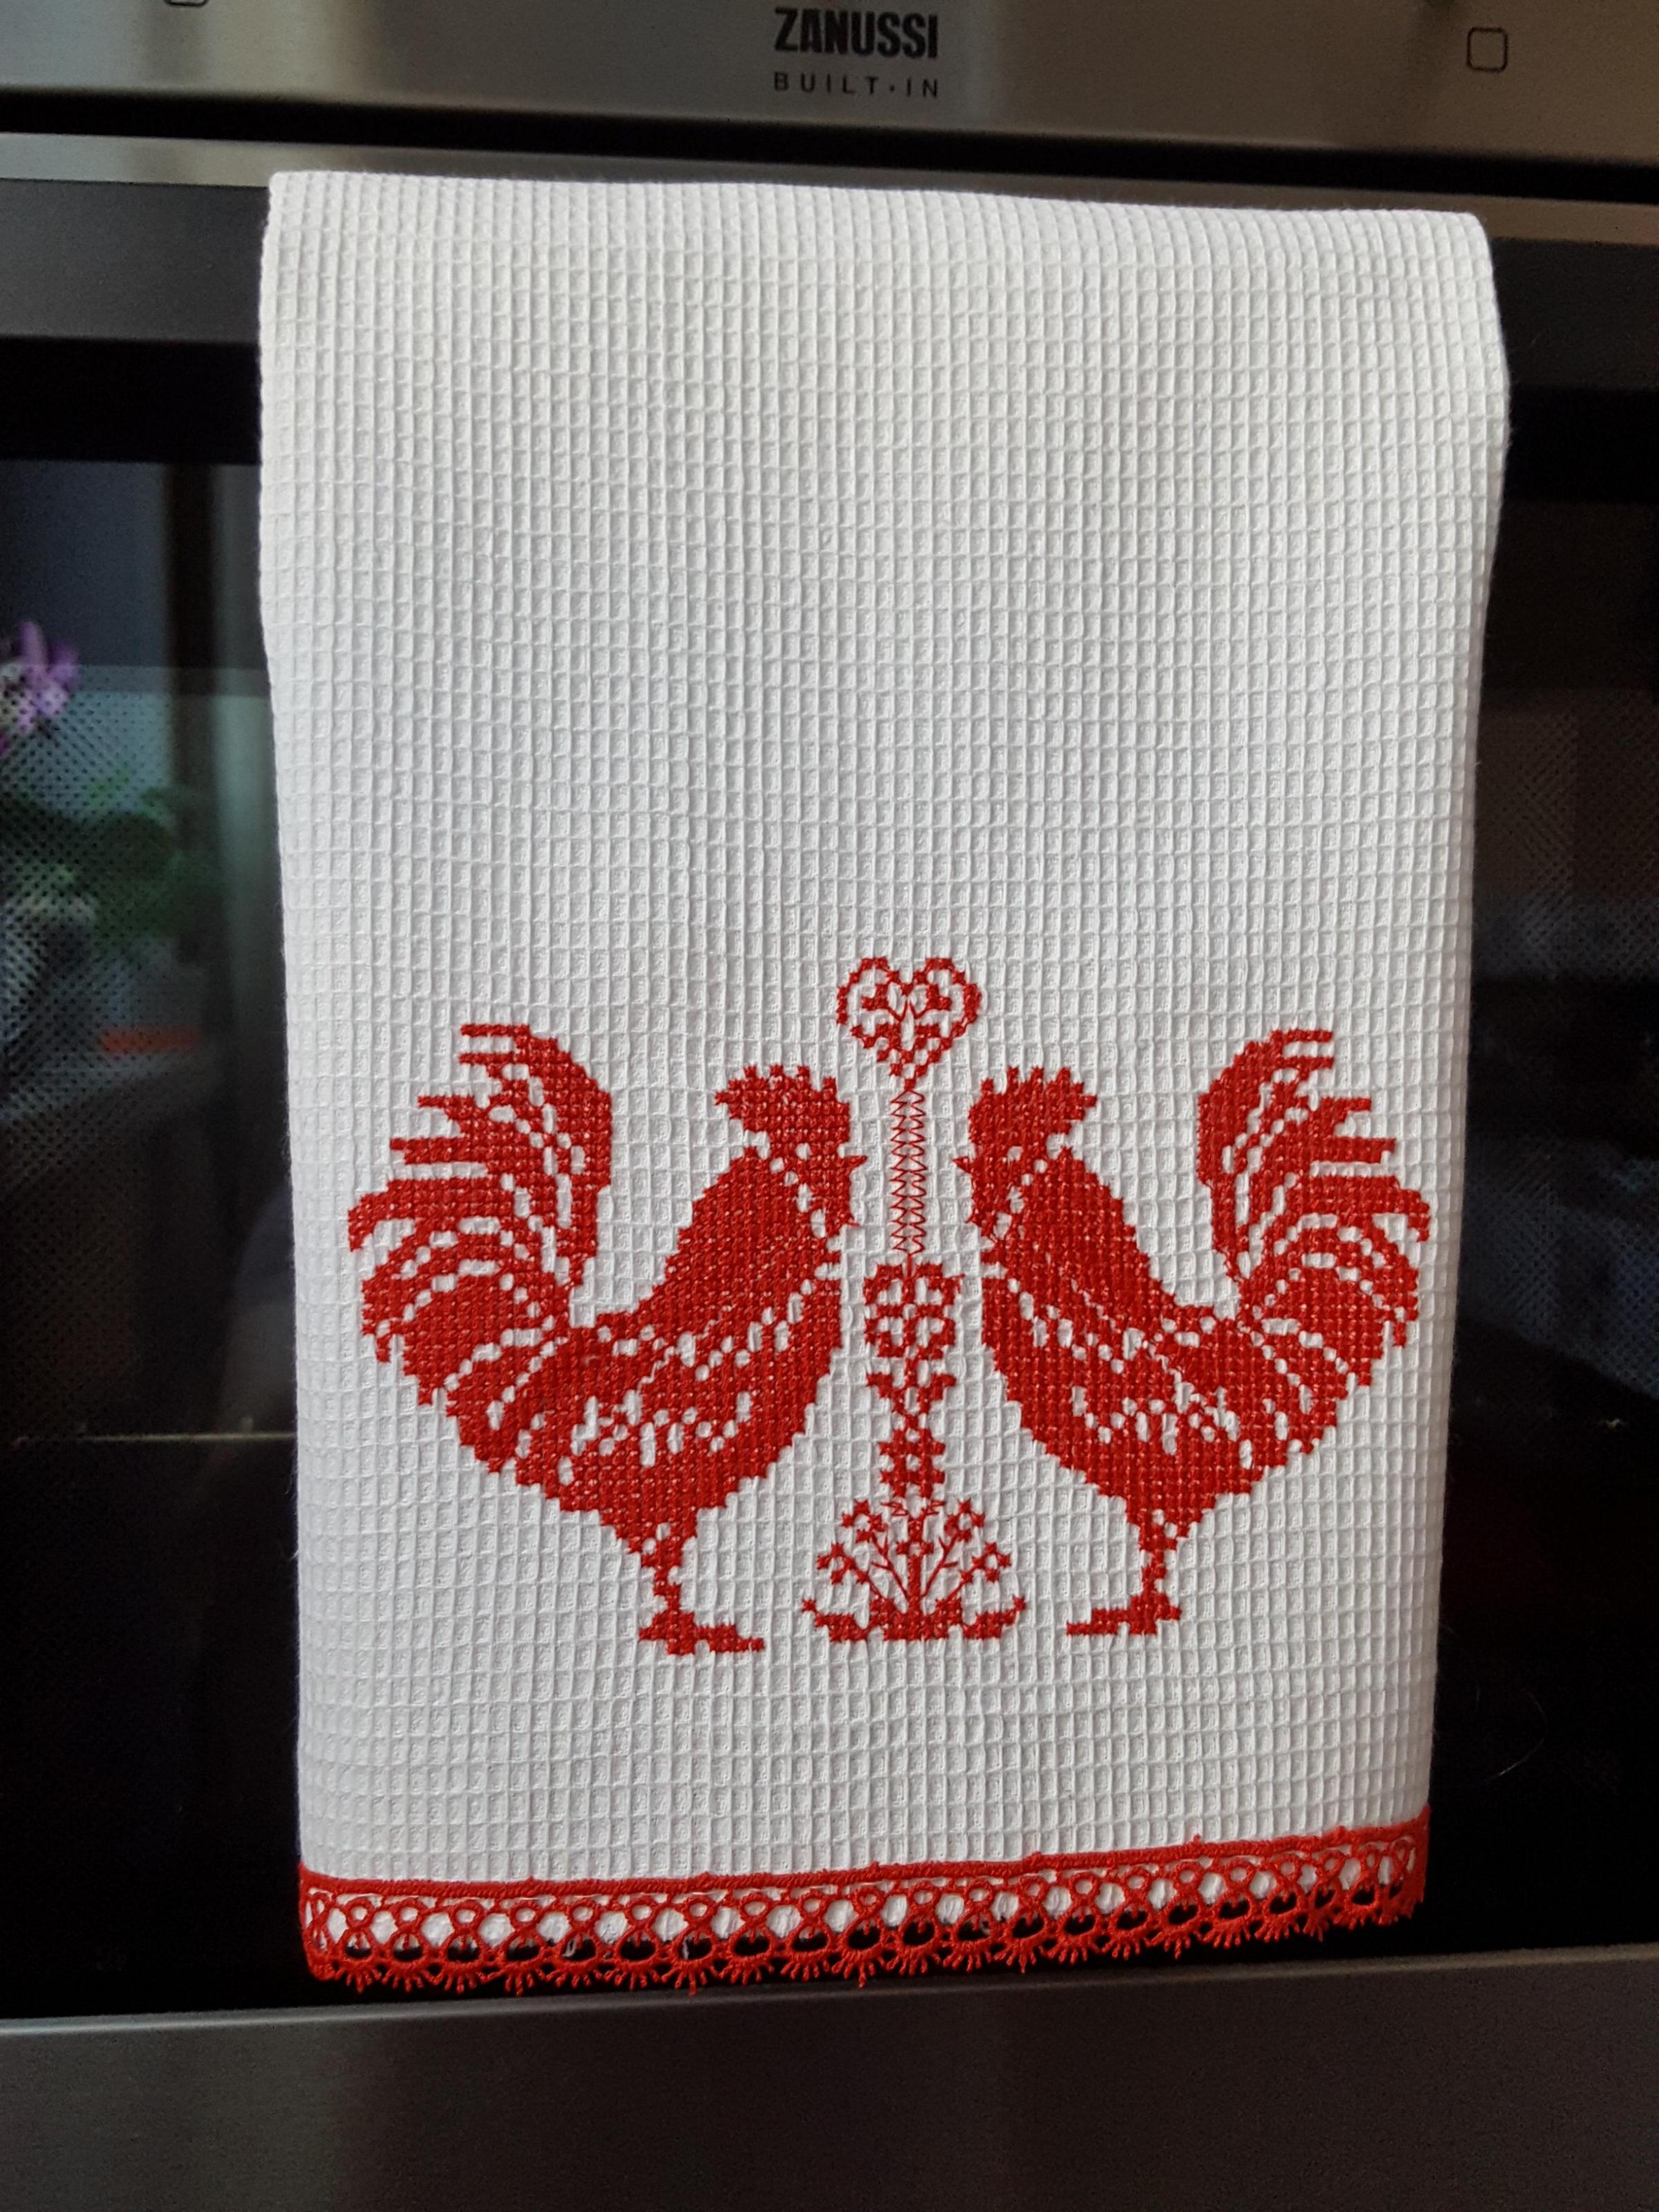 Chicken Embroidery Patterns Free Kitchen Towel With Red Roosters Cross Stitch Free Embroidery Design